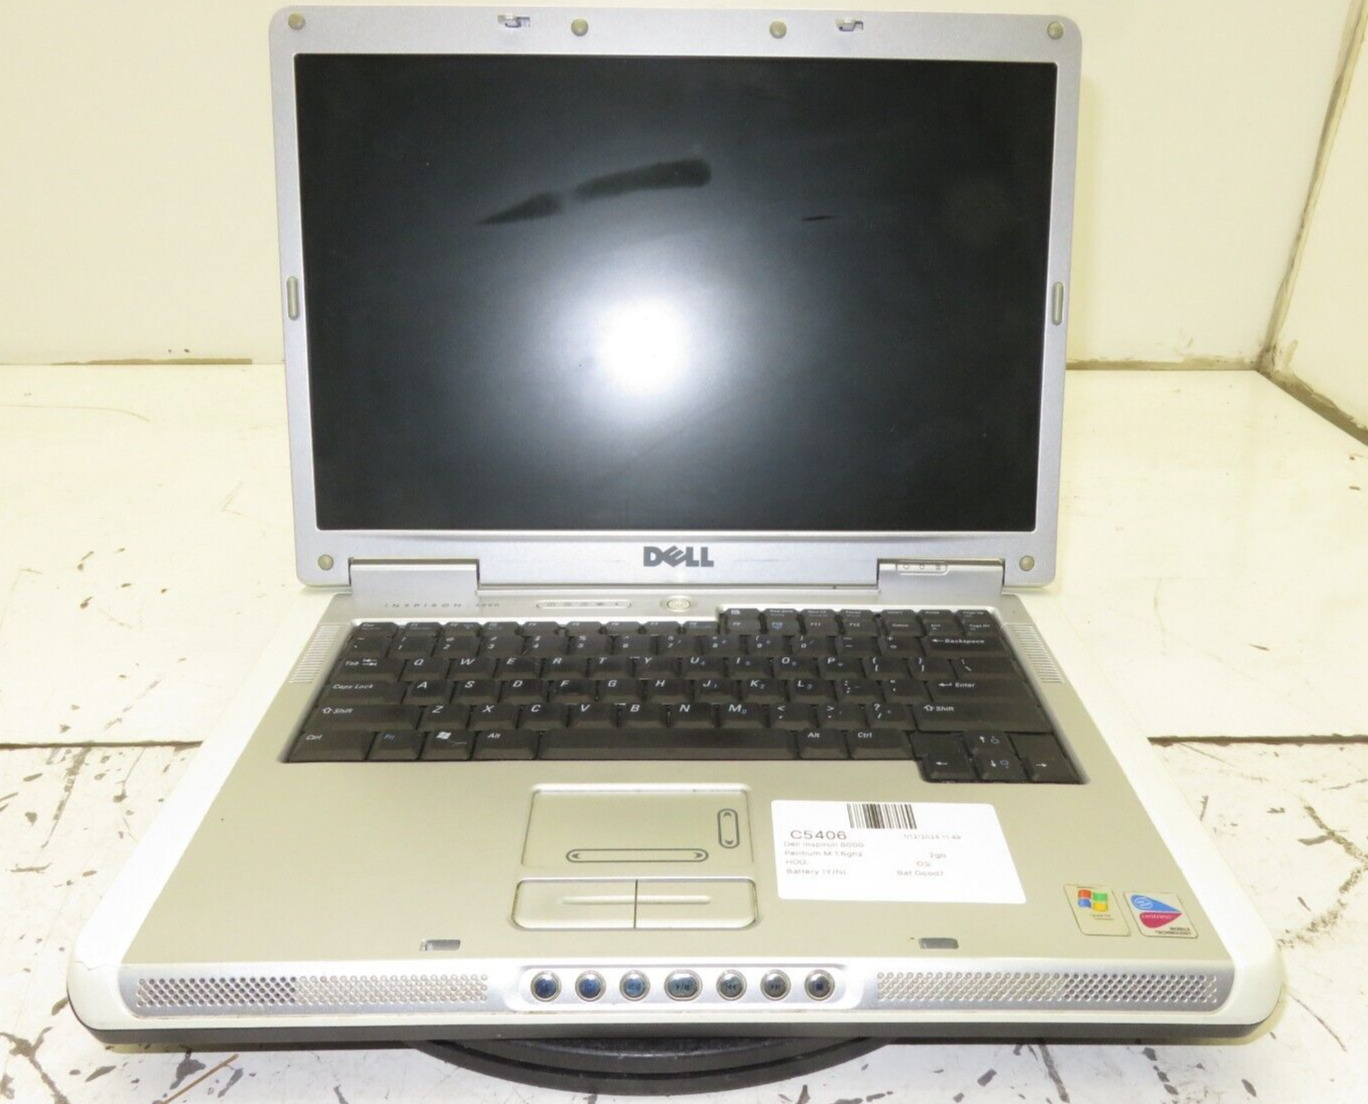 Dell Inspiron 6000 Laptop Intel Pentium M 2GB Ram No HDD or Battery